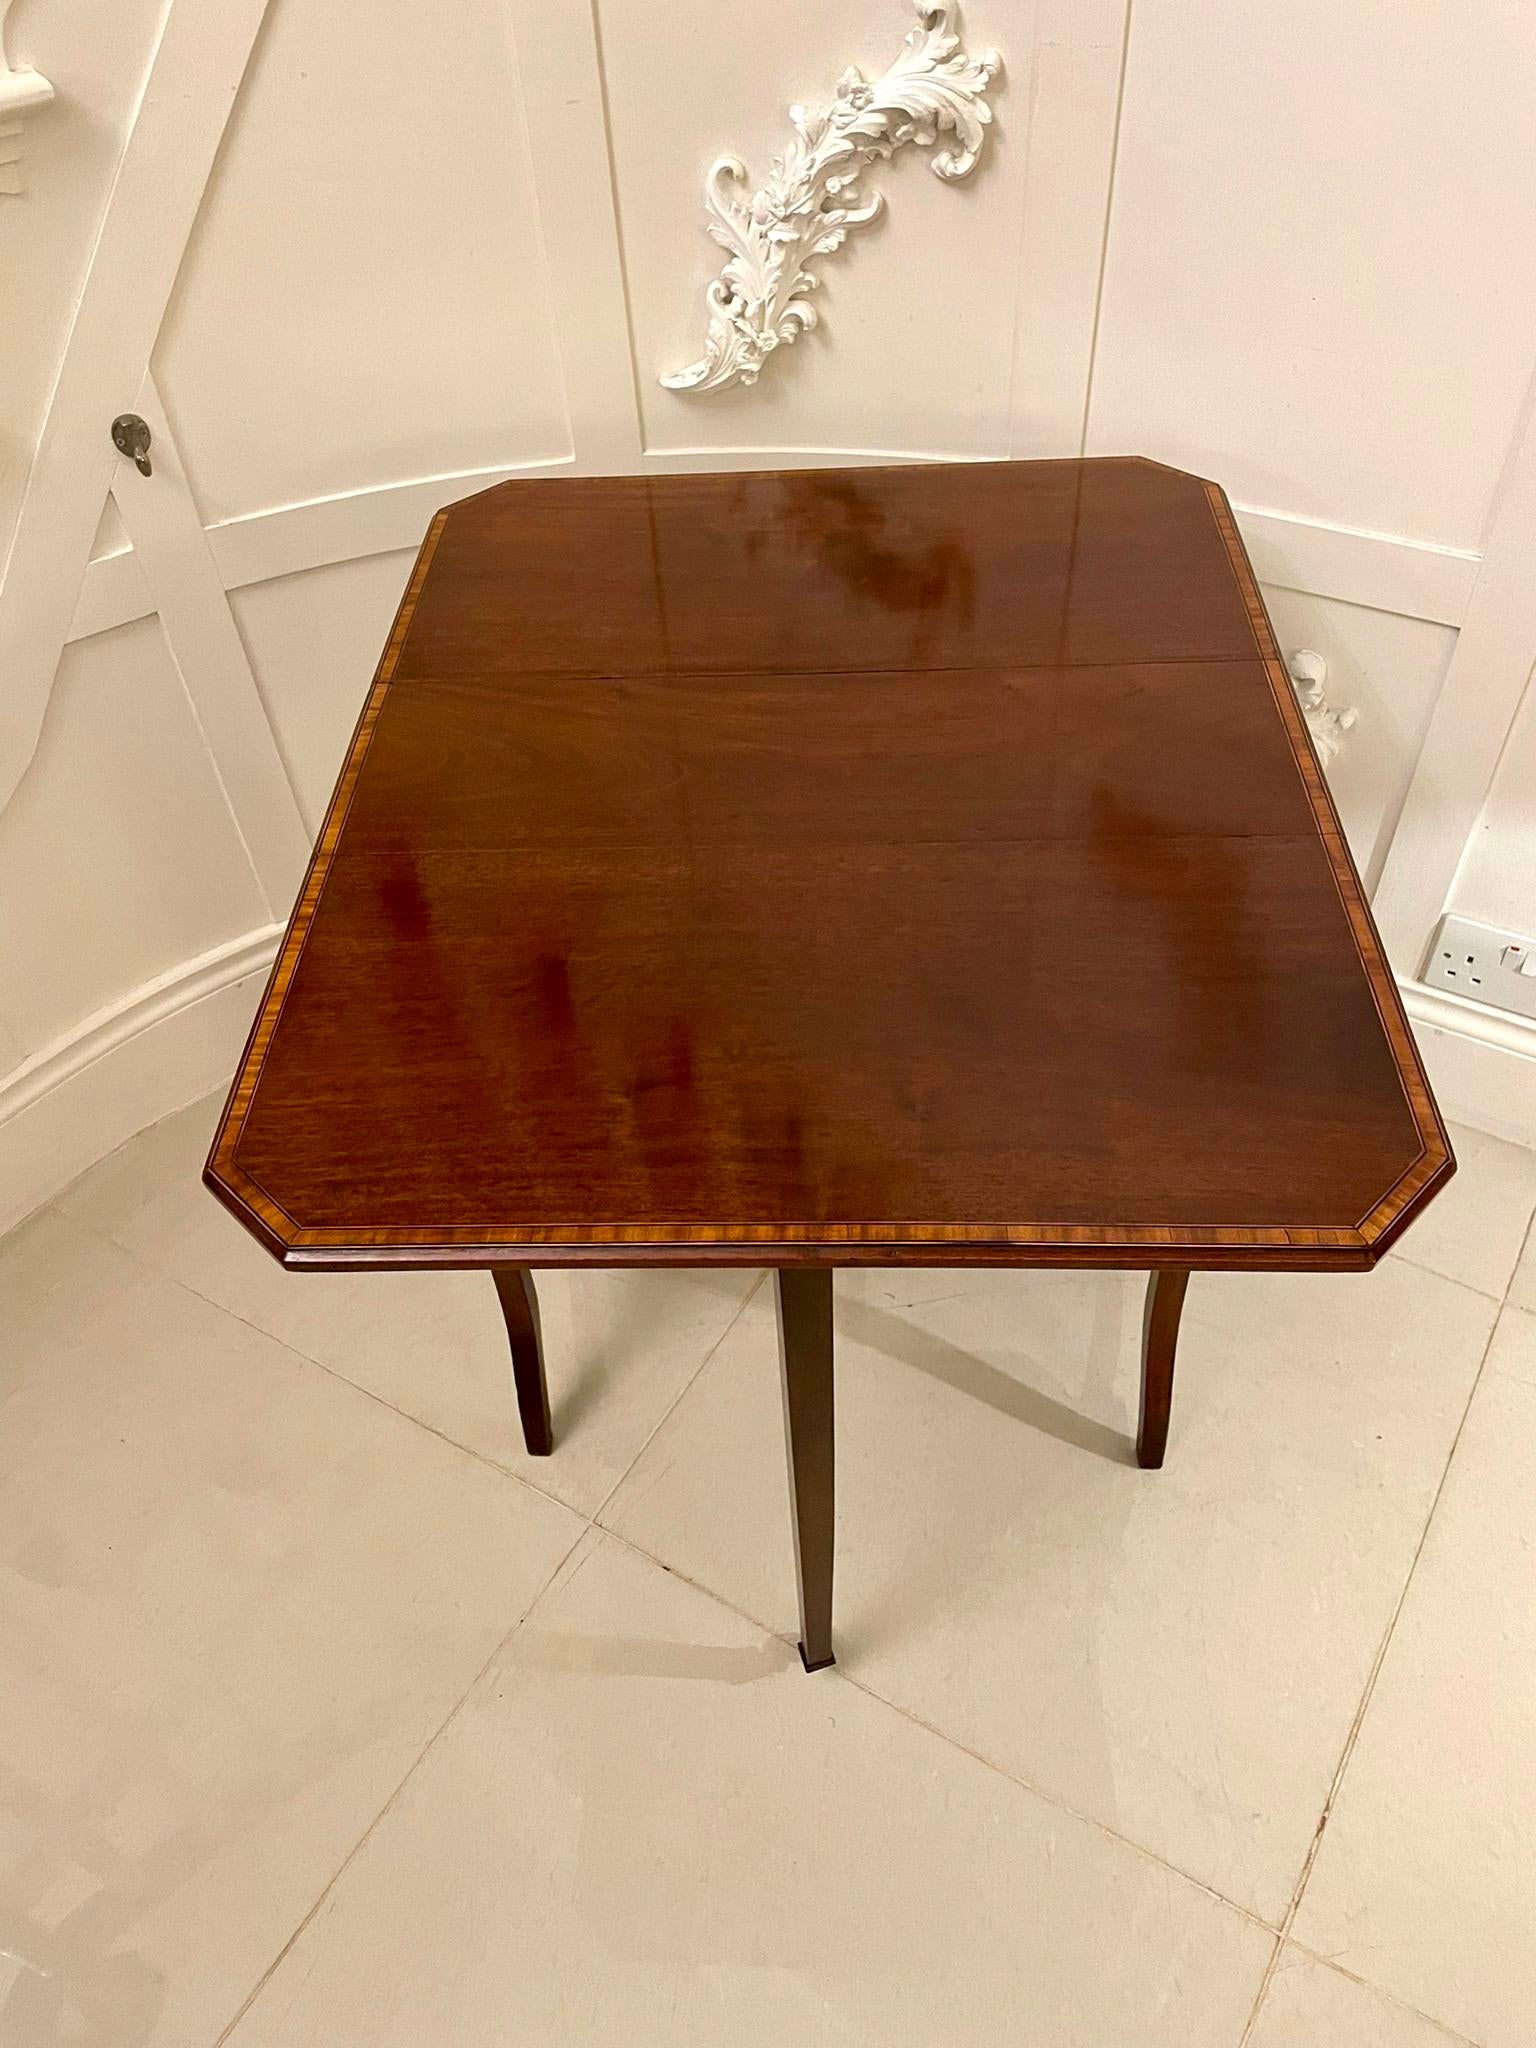 Antique Edwardian Quality Mahogany Inlaid Sutherland Table In Good Condition For Sale In Suffolk, GB